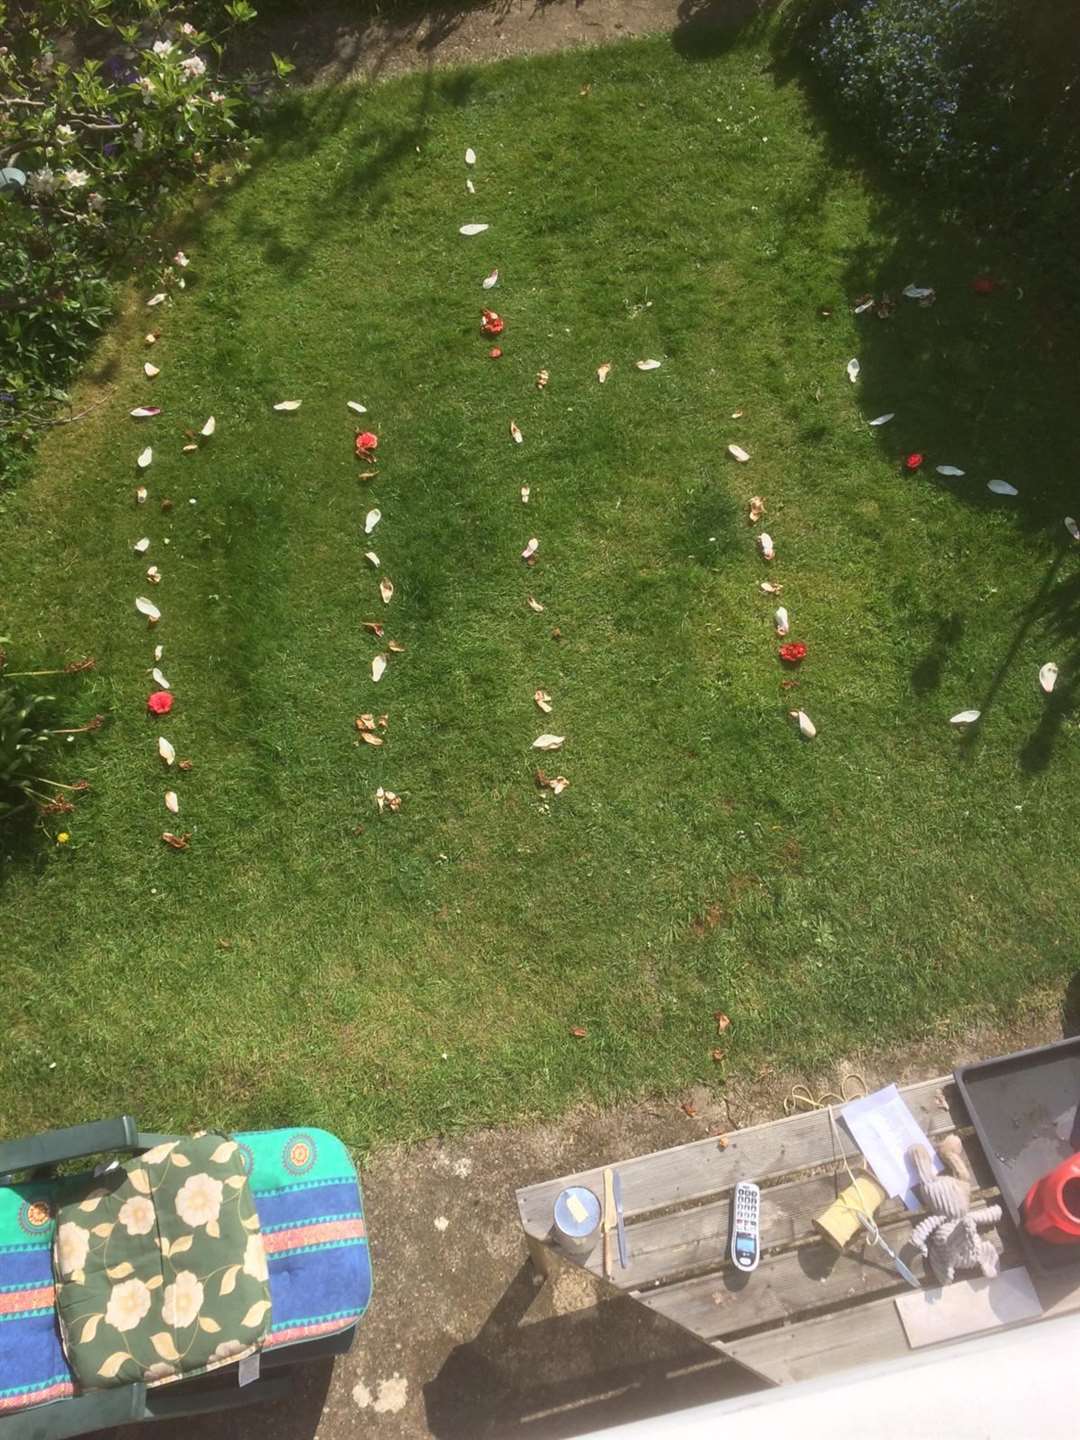 Alan Forman made this tribute to NHS workers like his duaghter in the garden